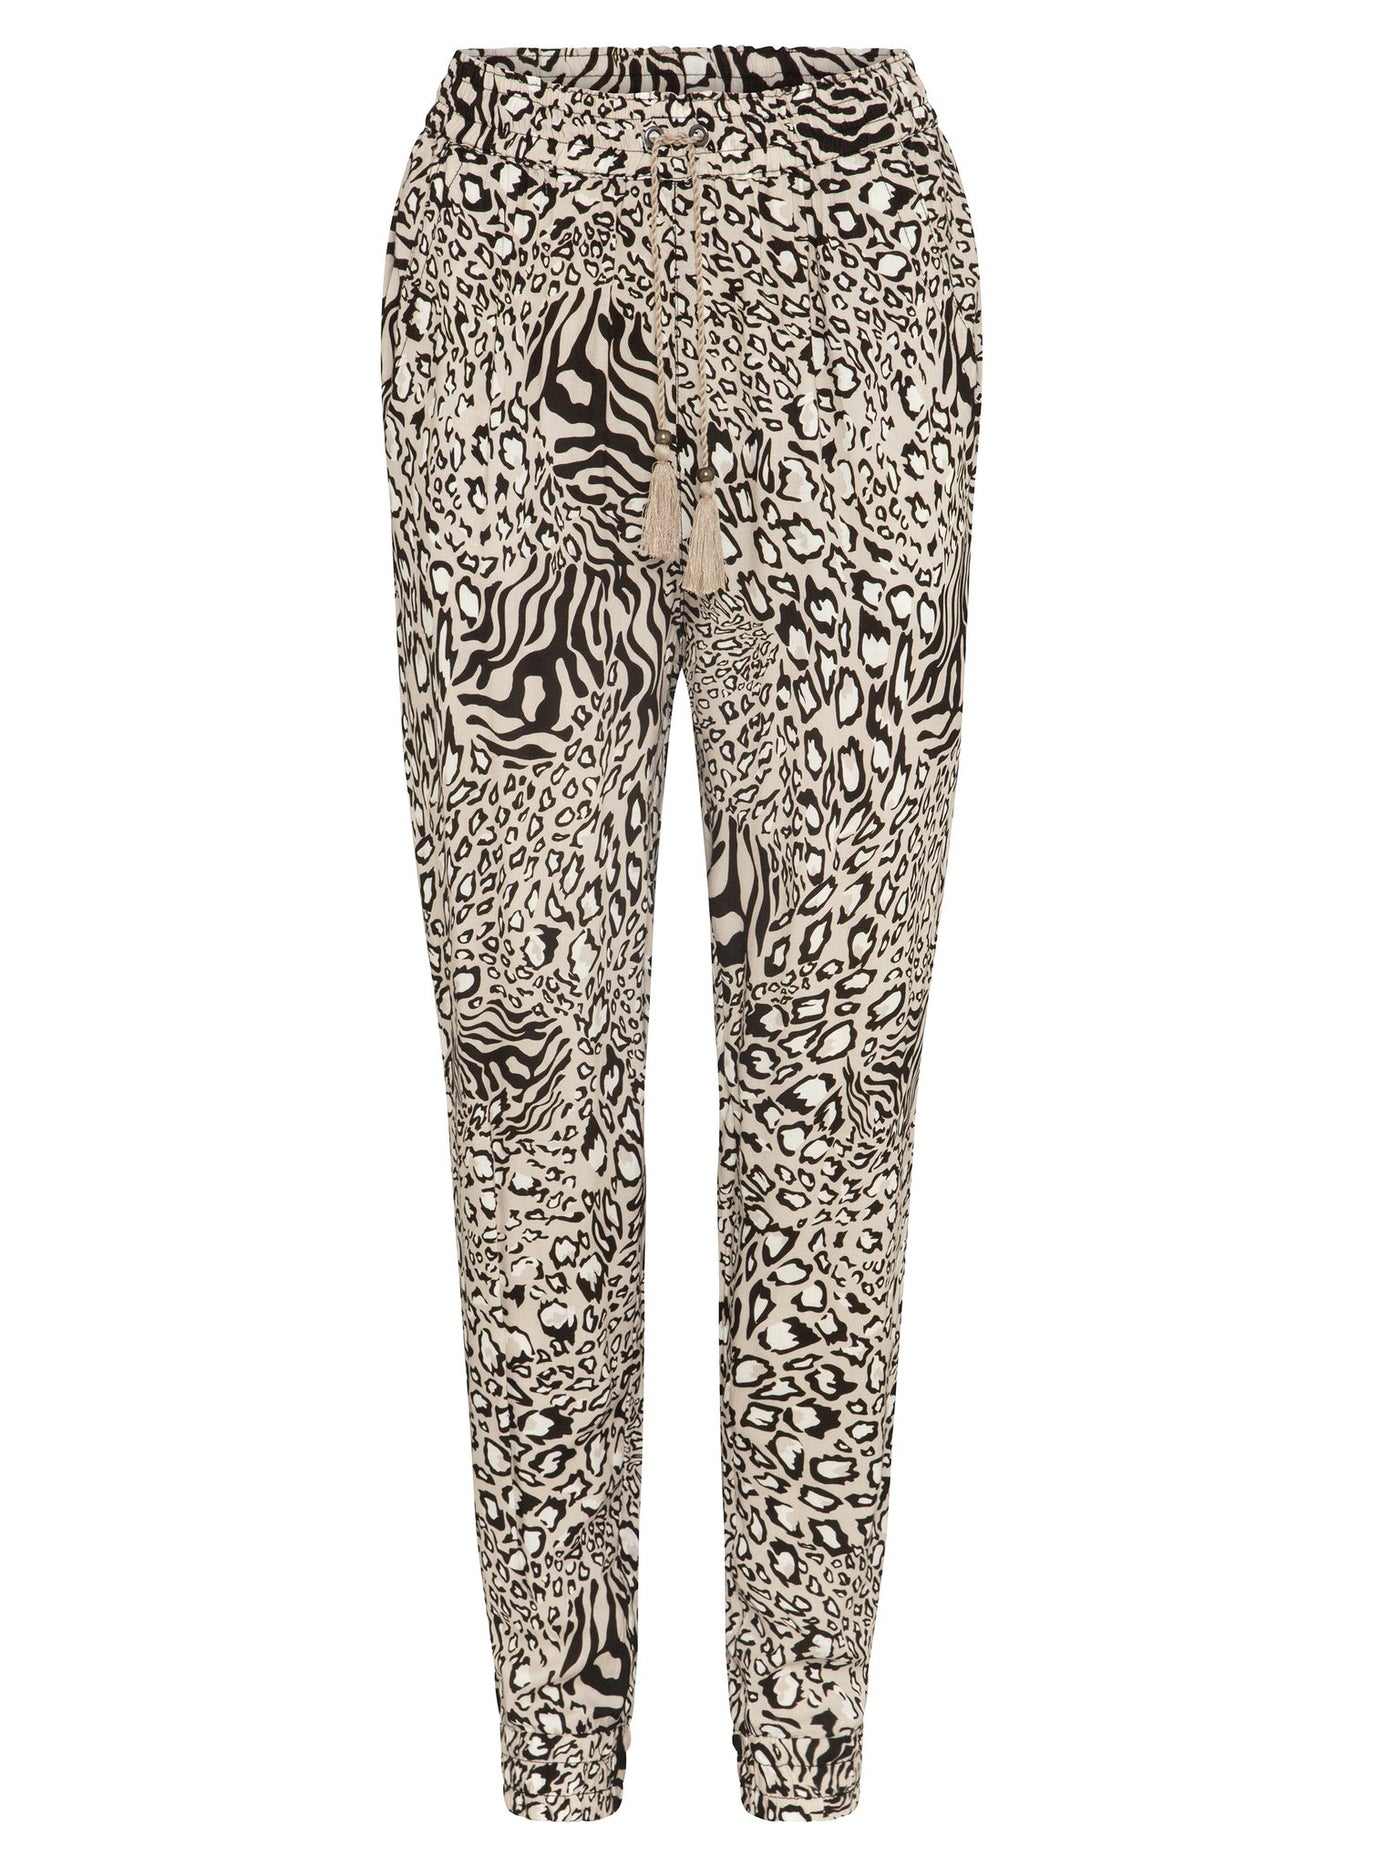 Womens boho animal print lounge pants in beige black white brown ghost mannequin front image